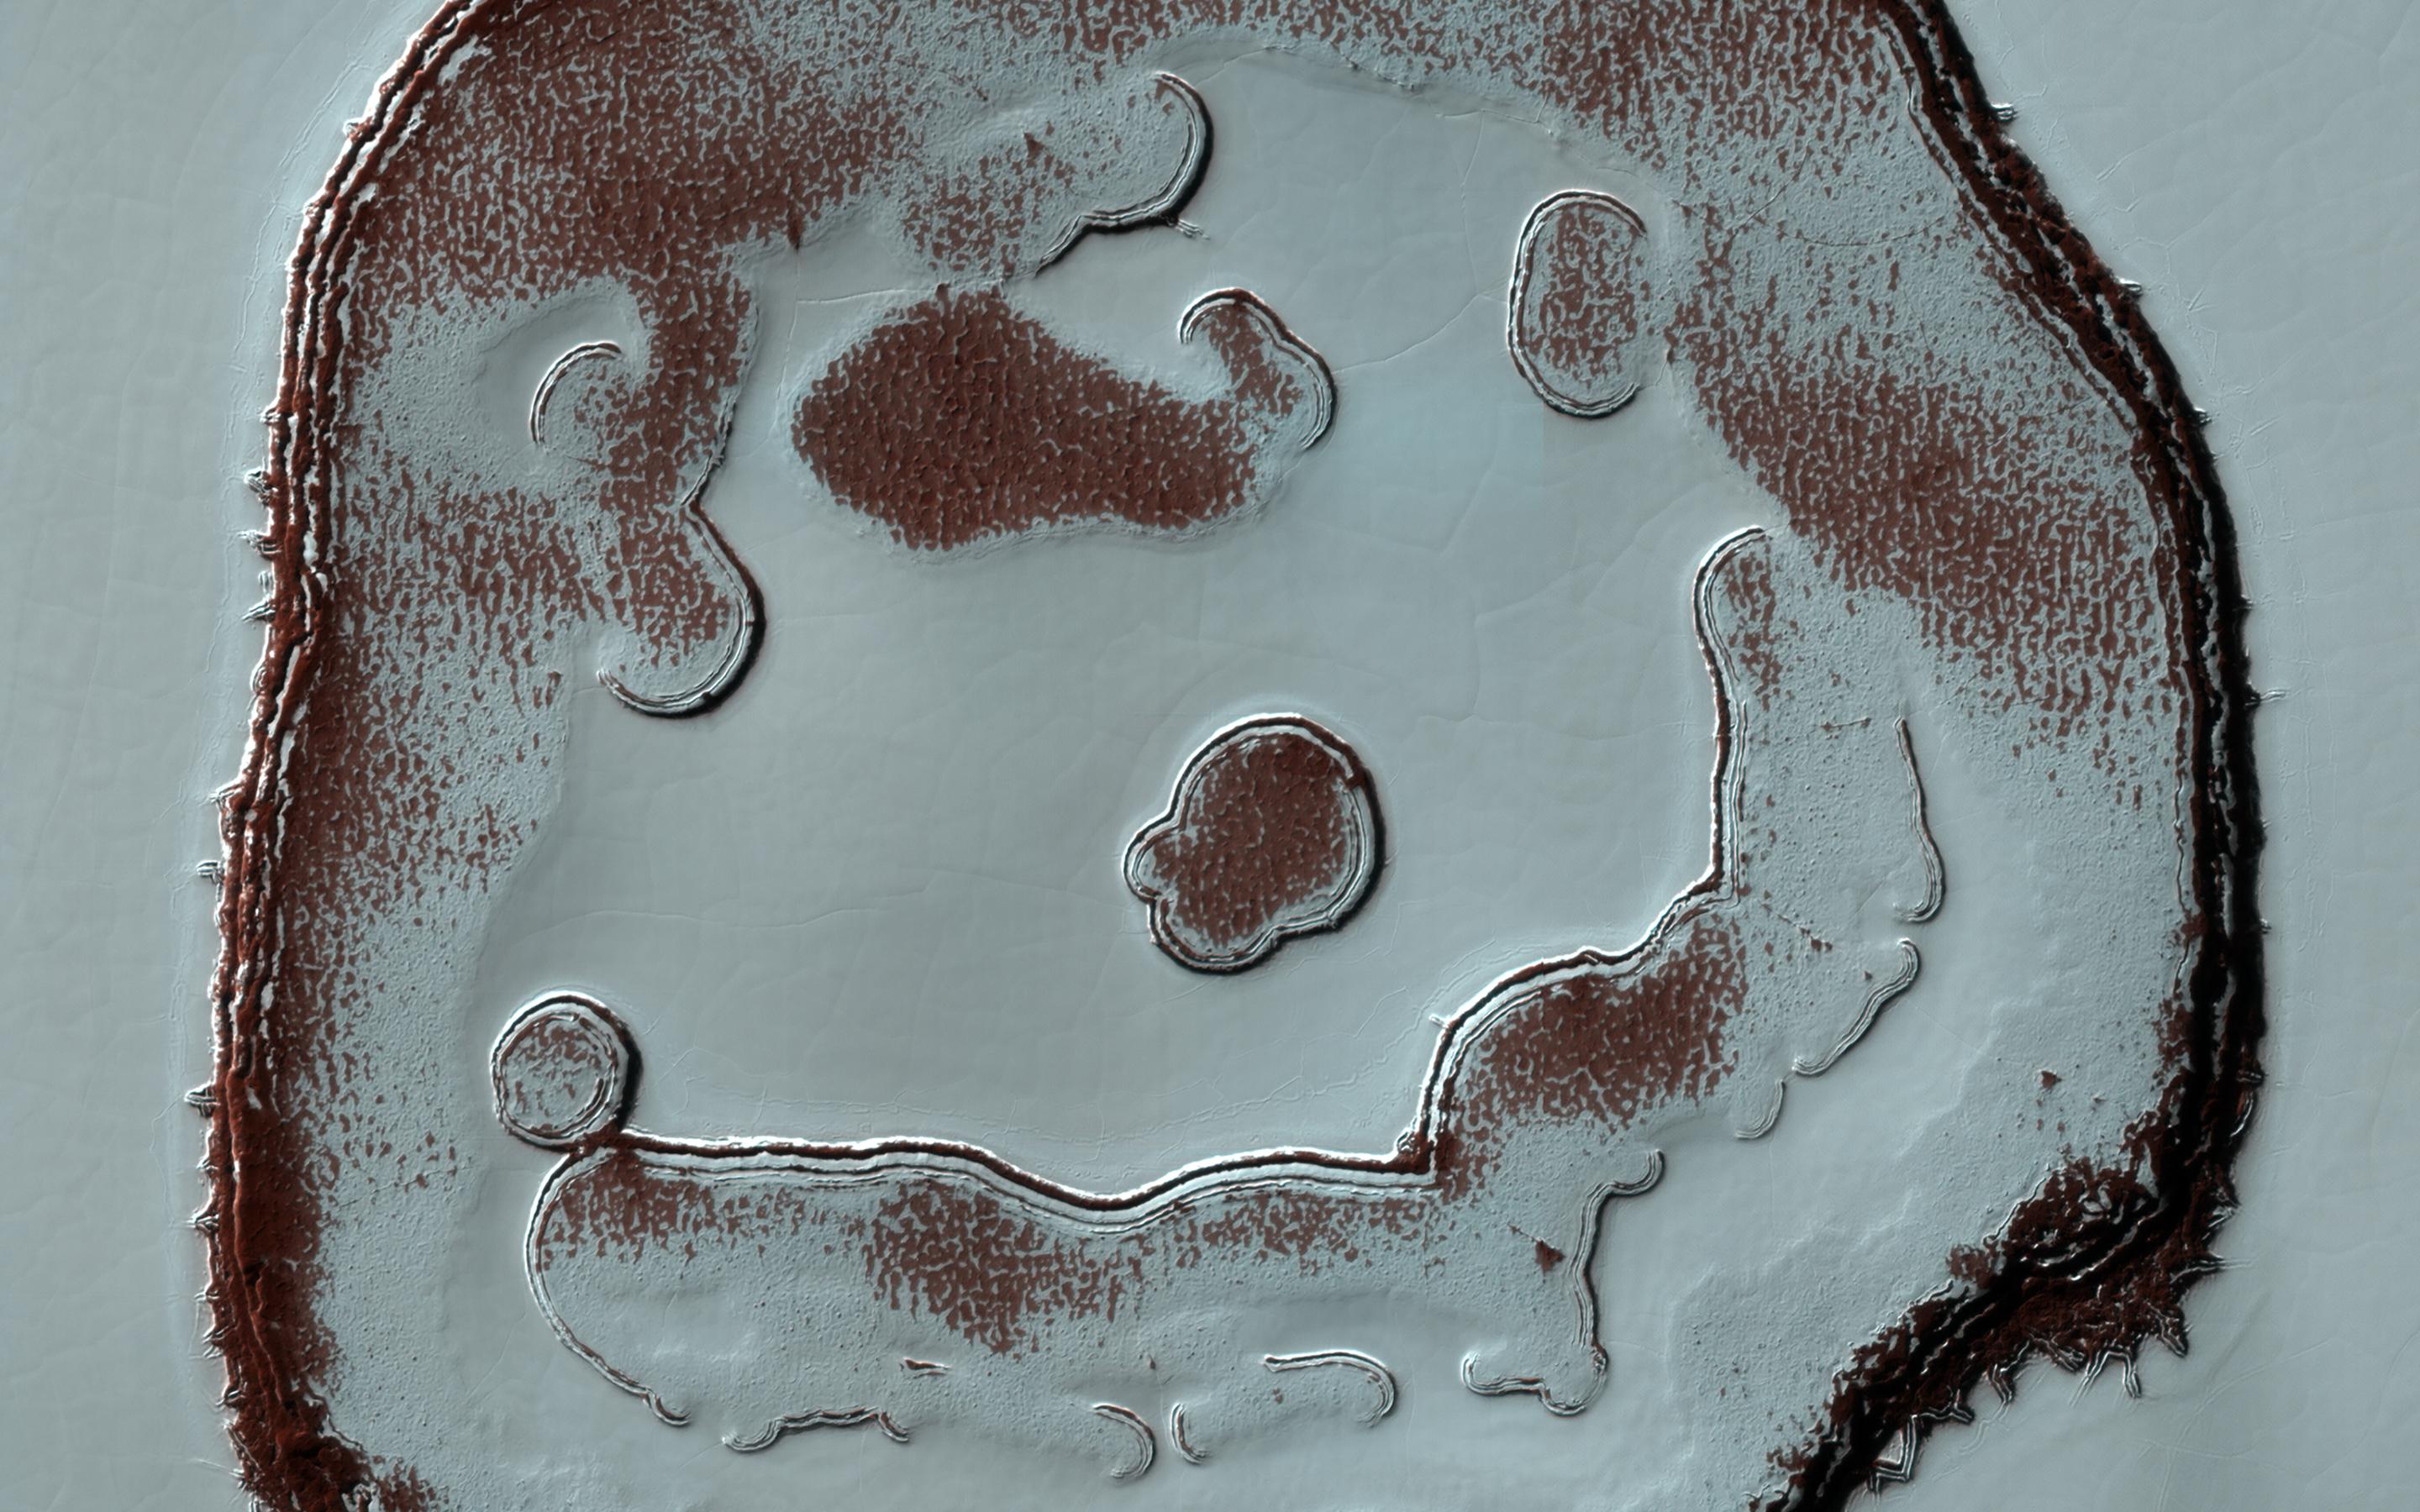 This image acquired on December 13, 2020 by NASAs Mars Reconnaissance Orbiter, shows blobby features in the polar cap that are due to the sun sublimating away the carbon dioxide into these round patterns.